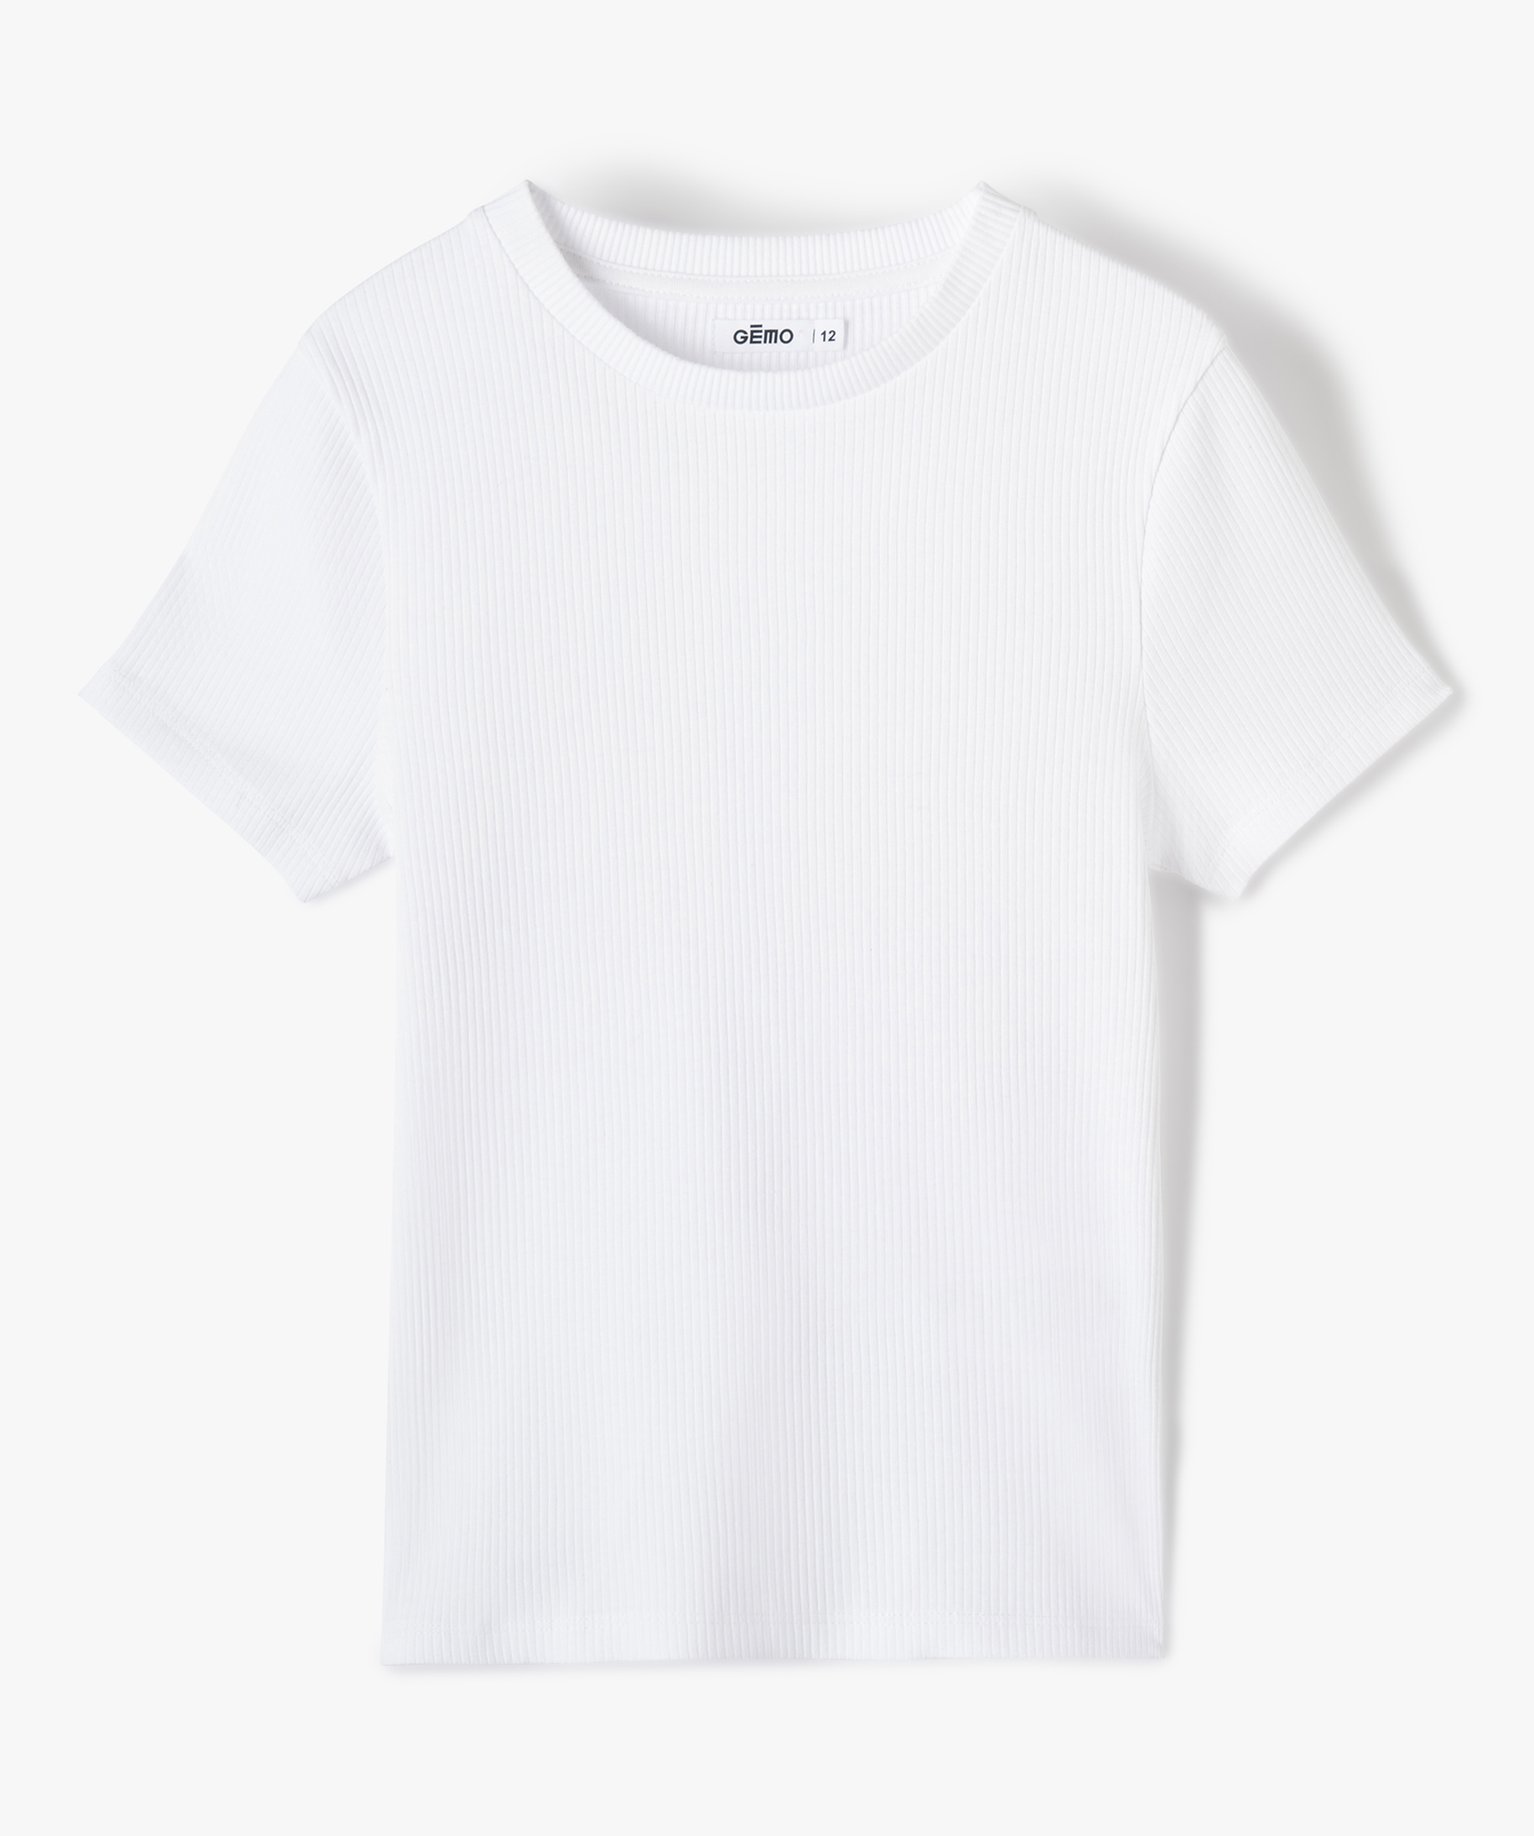 tee-shirt fille en maille cotelee a manches courtes blanc tee-shirts